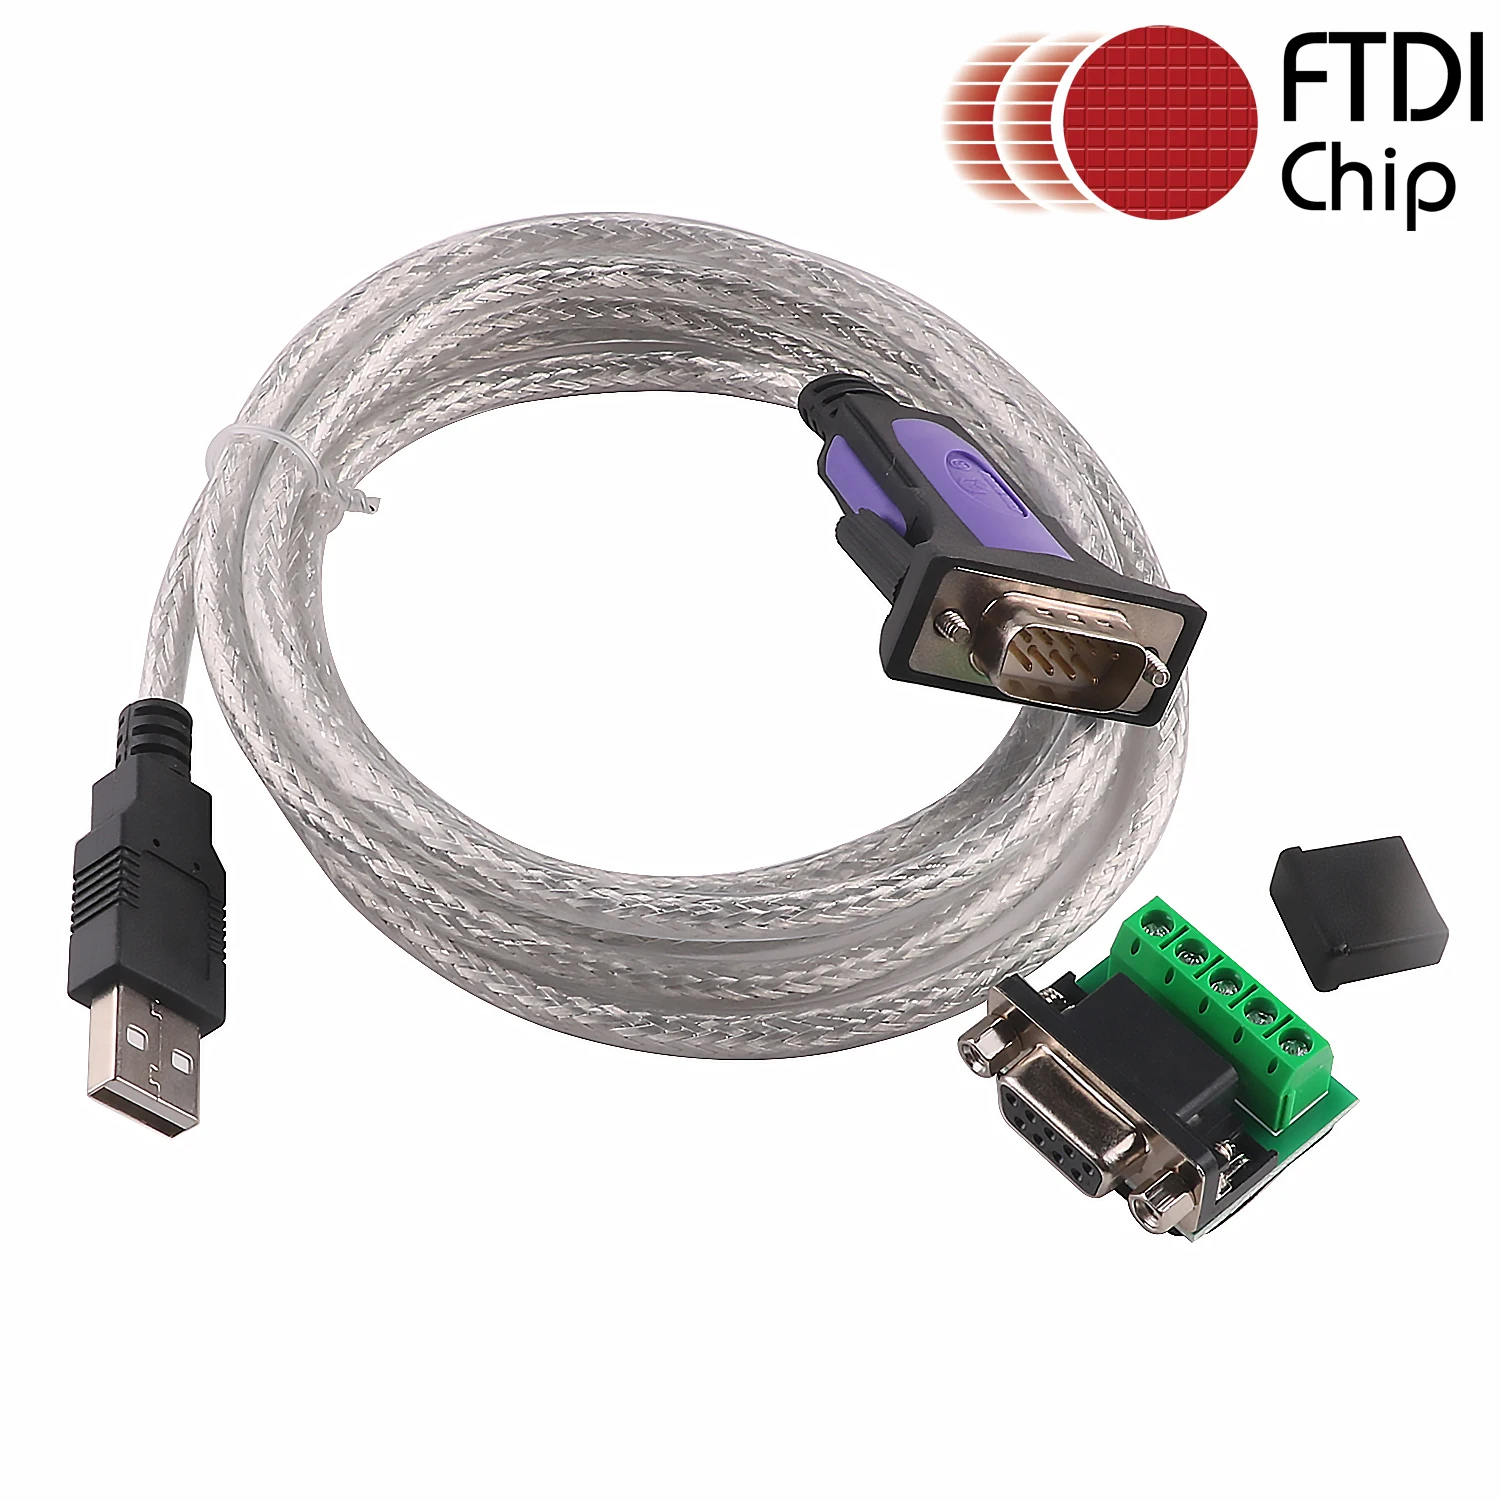 

USB to DB9 Male RS232 Serial Cable FTDI Standard DB9 Male 9 Pin 9P with DB9 to Screw Terminal Adapter